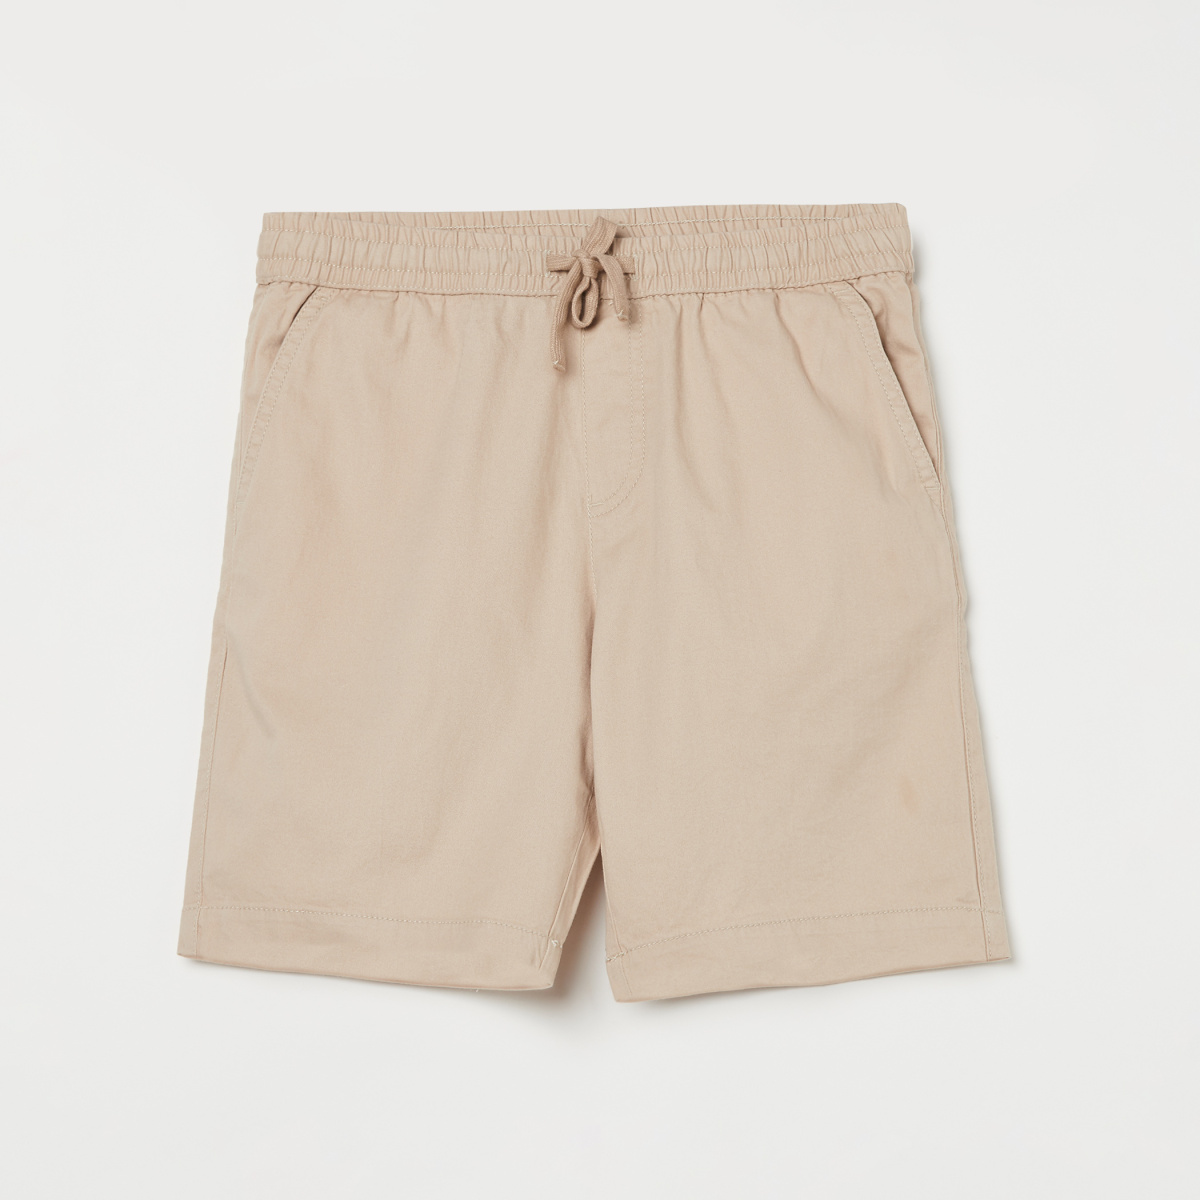 FAME FOREVER YOUNG Boys Solid Drawstring Waist Shorts